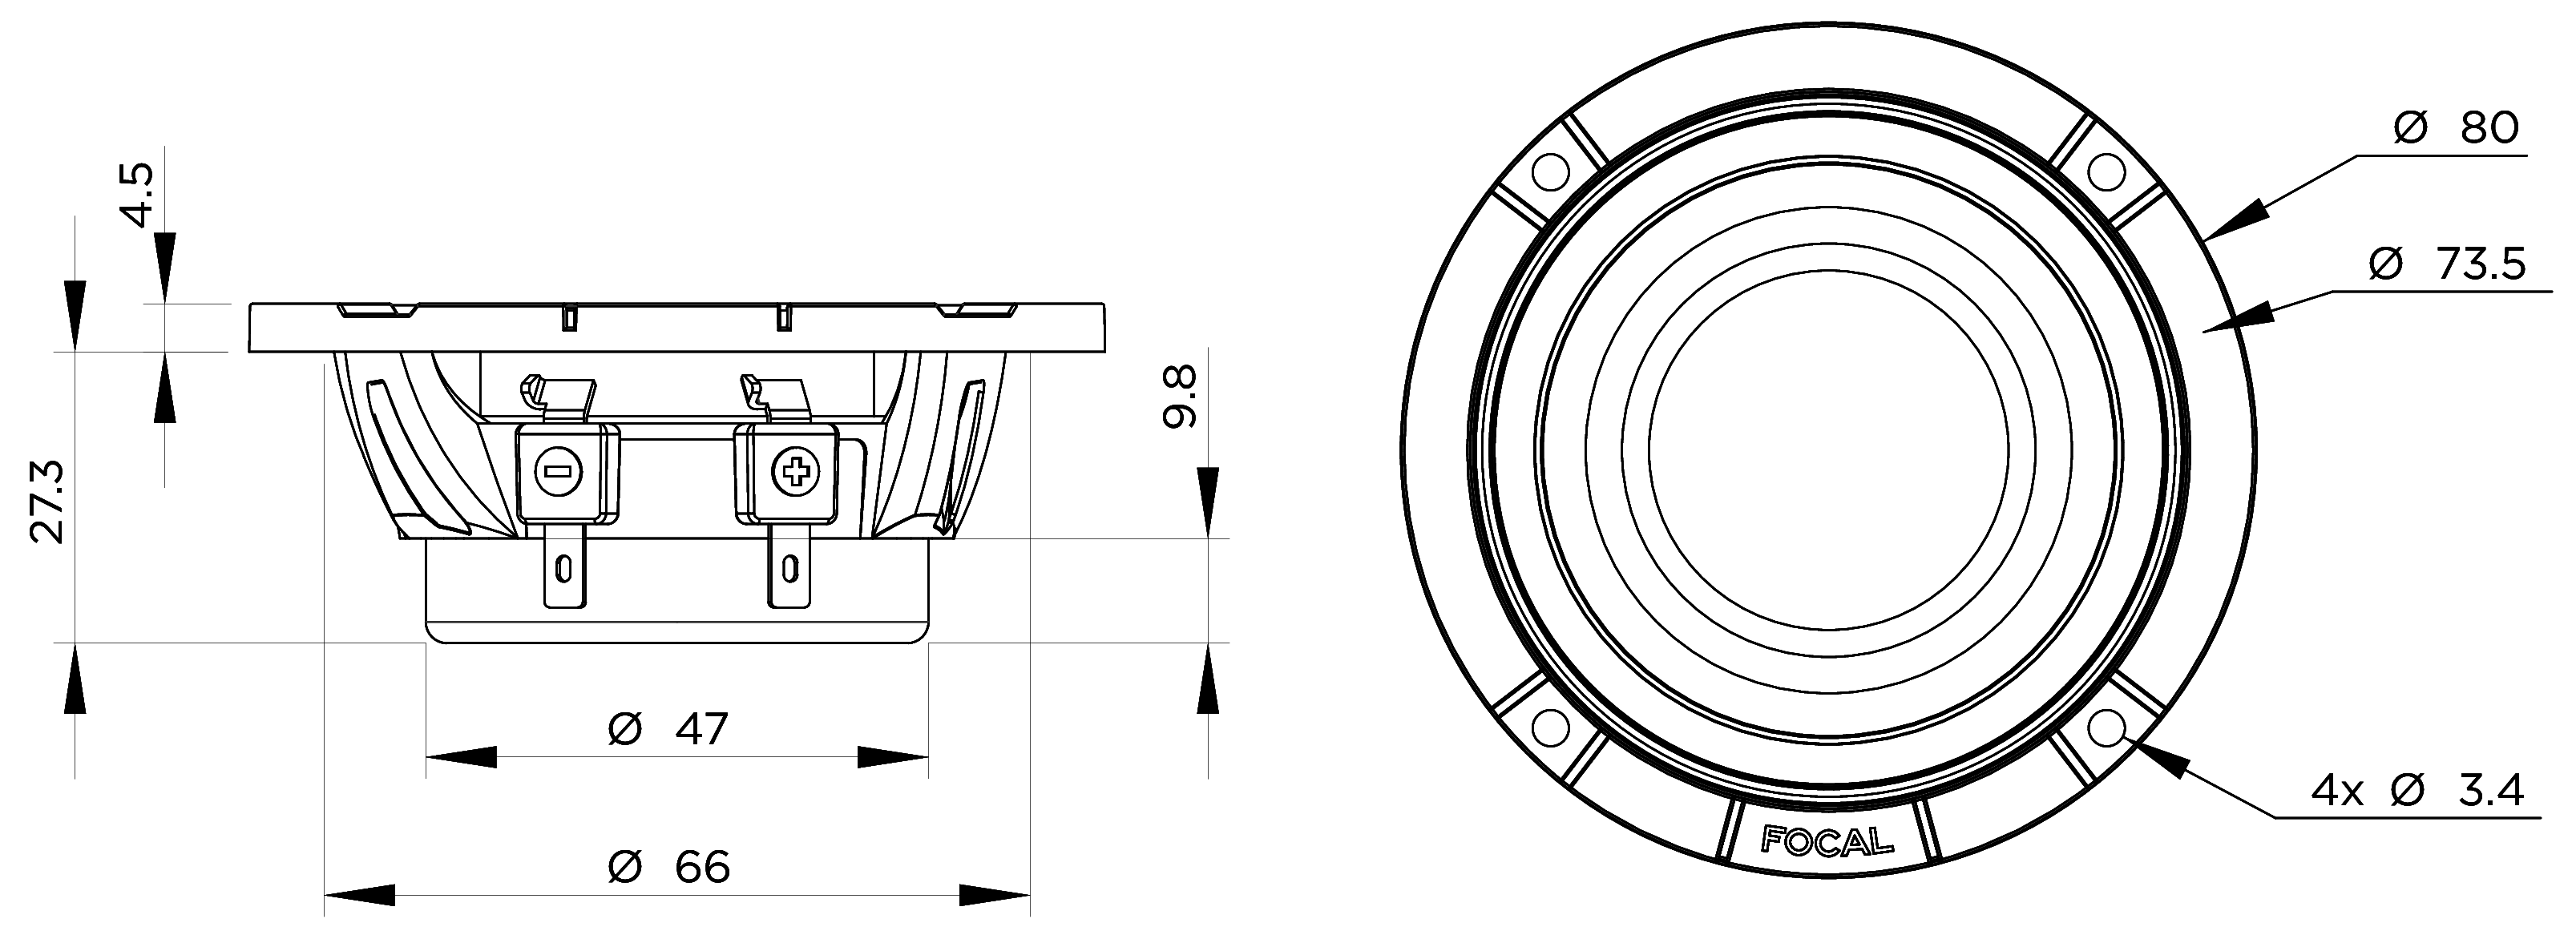 Focal 3 KM Dimensions